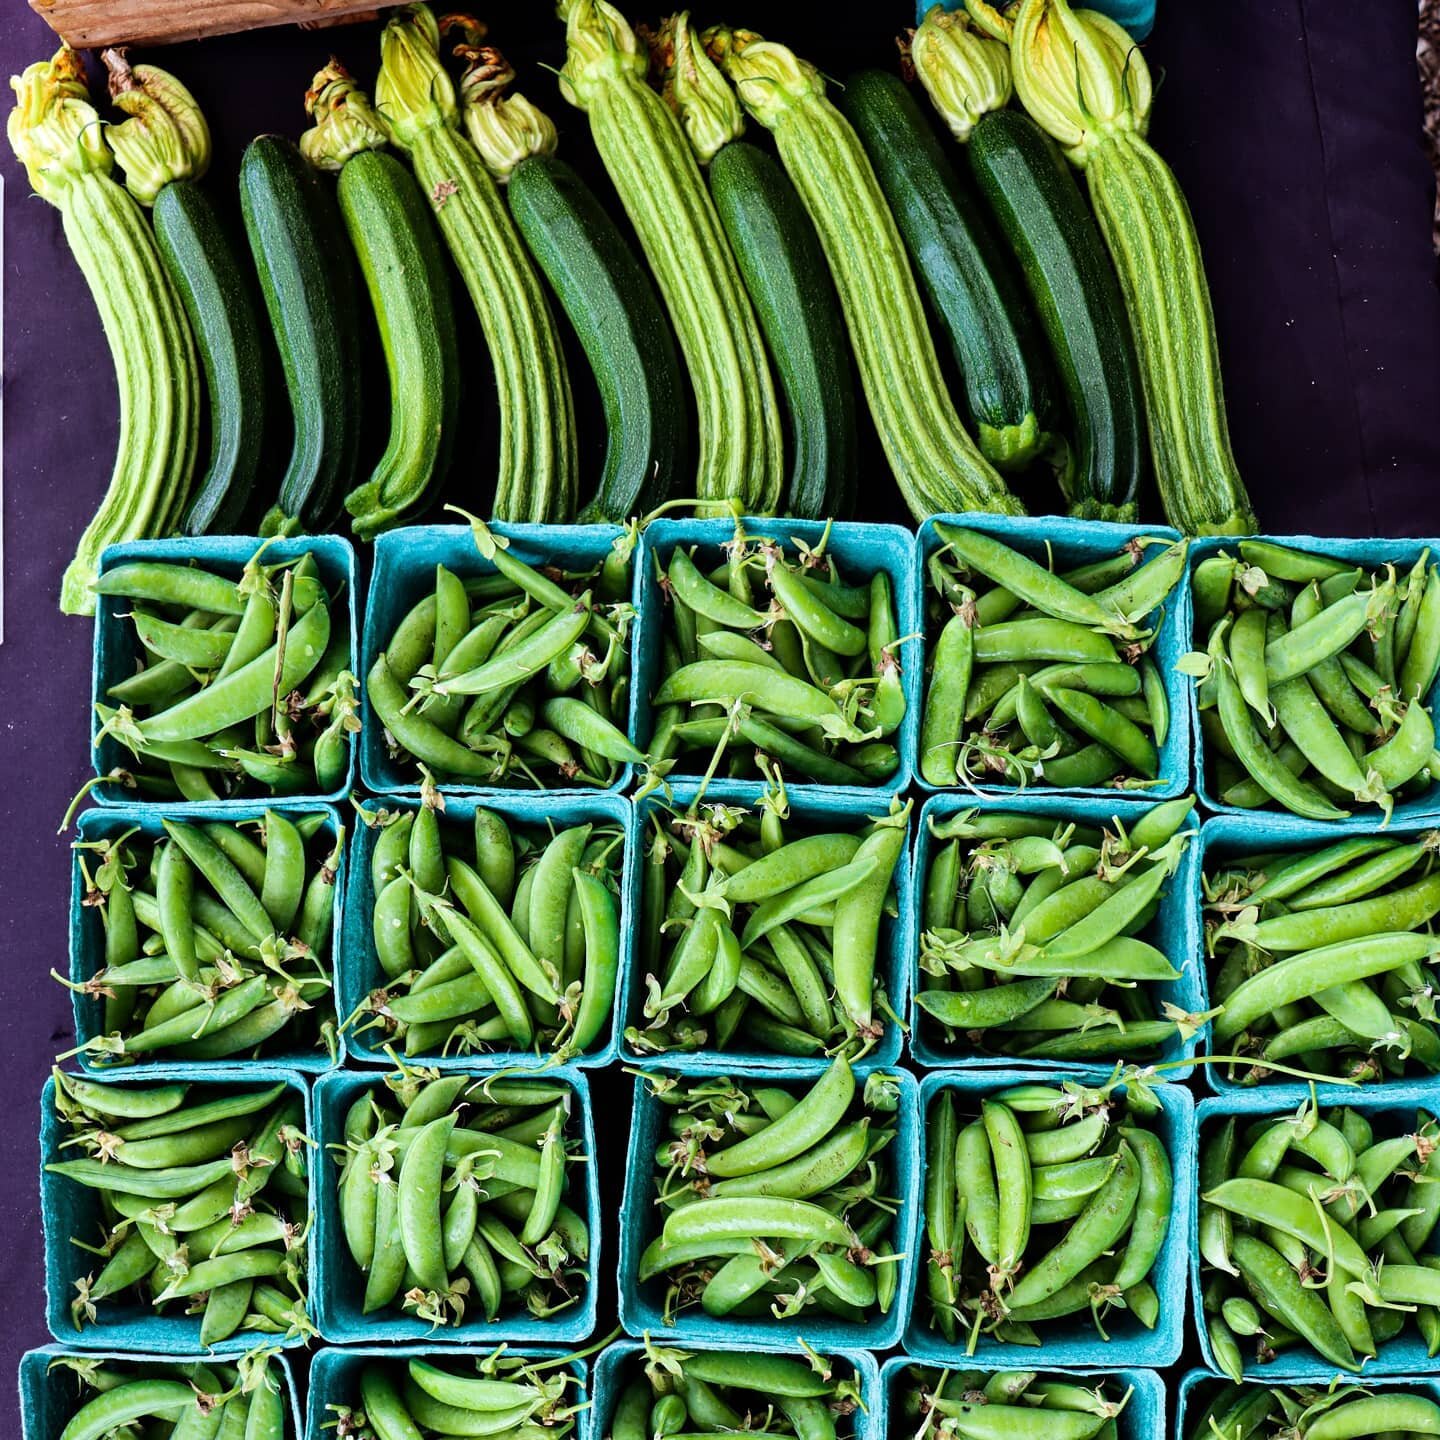 We've got the farmstand open today (Sunday)! Stop on by and get yourself some tasty treats 😋  these peas are the perfect little road snack for all of you on the move during this combination Solstice/Father's day!  #happyfathersday #summersolstice #f